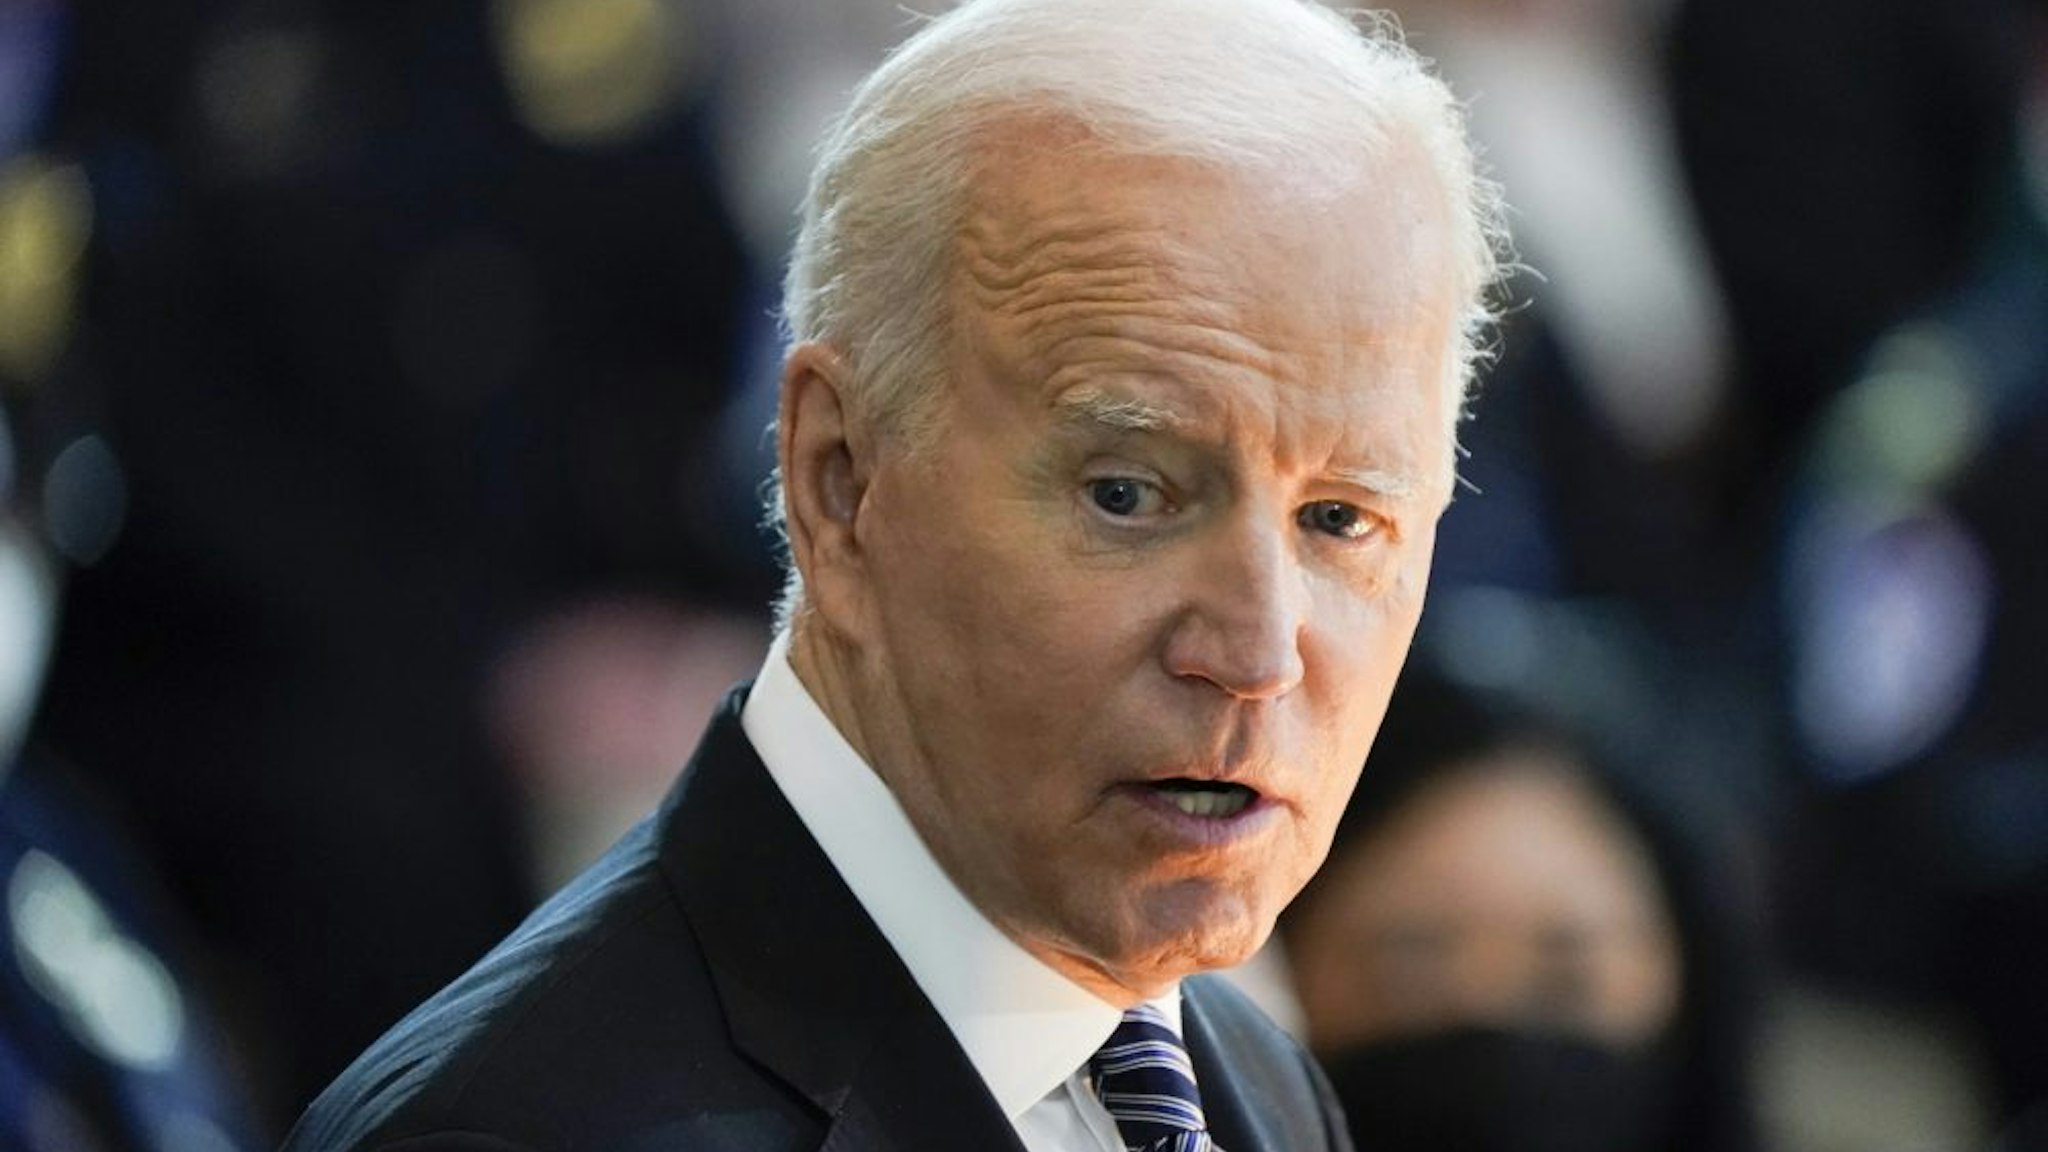 U.S. President Joe Biden speaks during a ceremony for late U.S. Capitol Police Officer William "Billy" Evans at the U.S. Capitol Rotunda in Washington, D.C., U.S., on Tuesday, April 13, 2021. Evans was slain during an attack on the Capitol perimeter on April 2 by a knife-wielding man crashing a car into a security checkpoint.